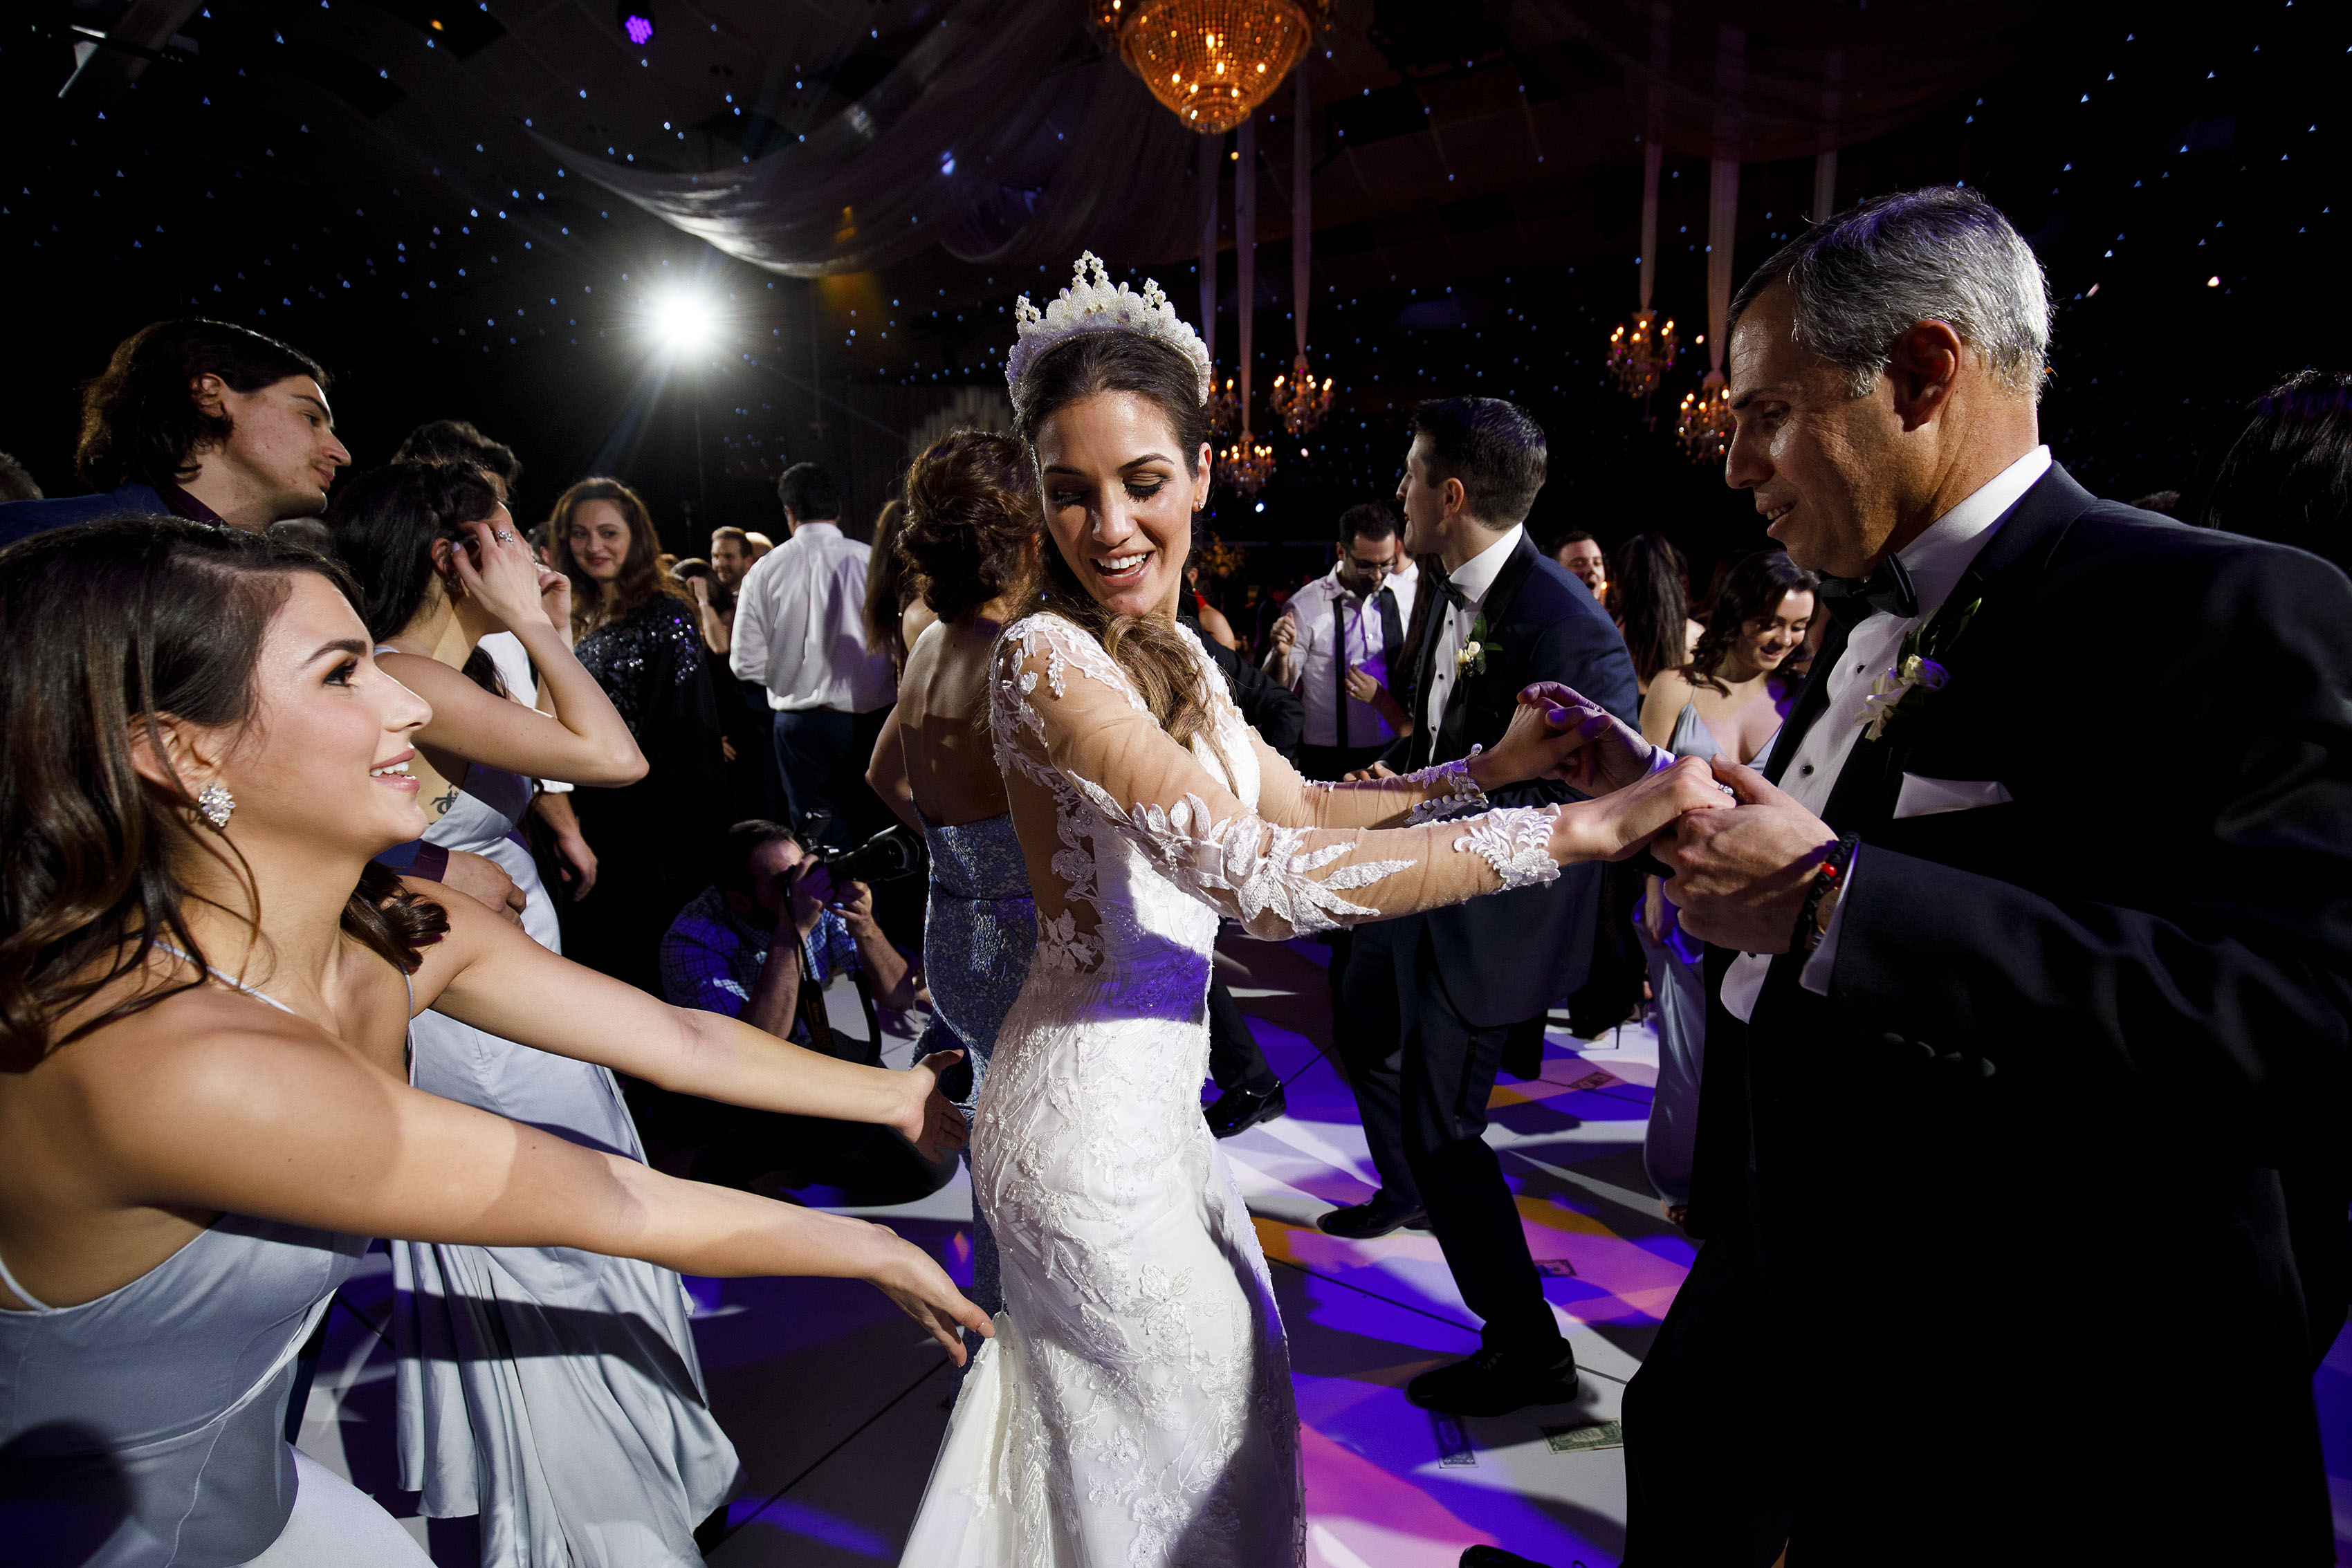 Guests dance during a wedding recetion at Seawell Ballroom